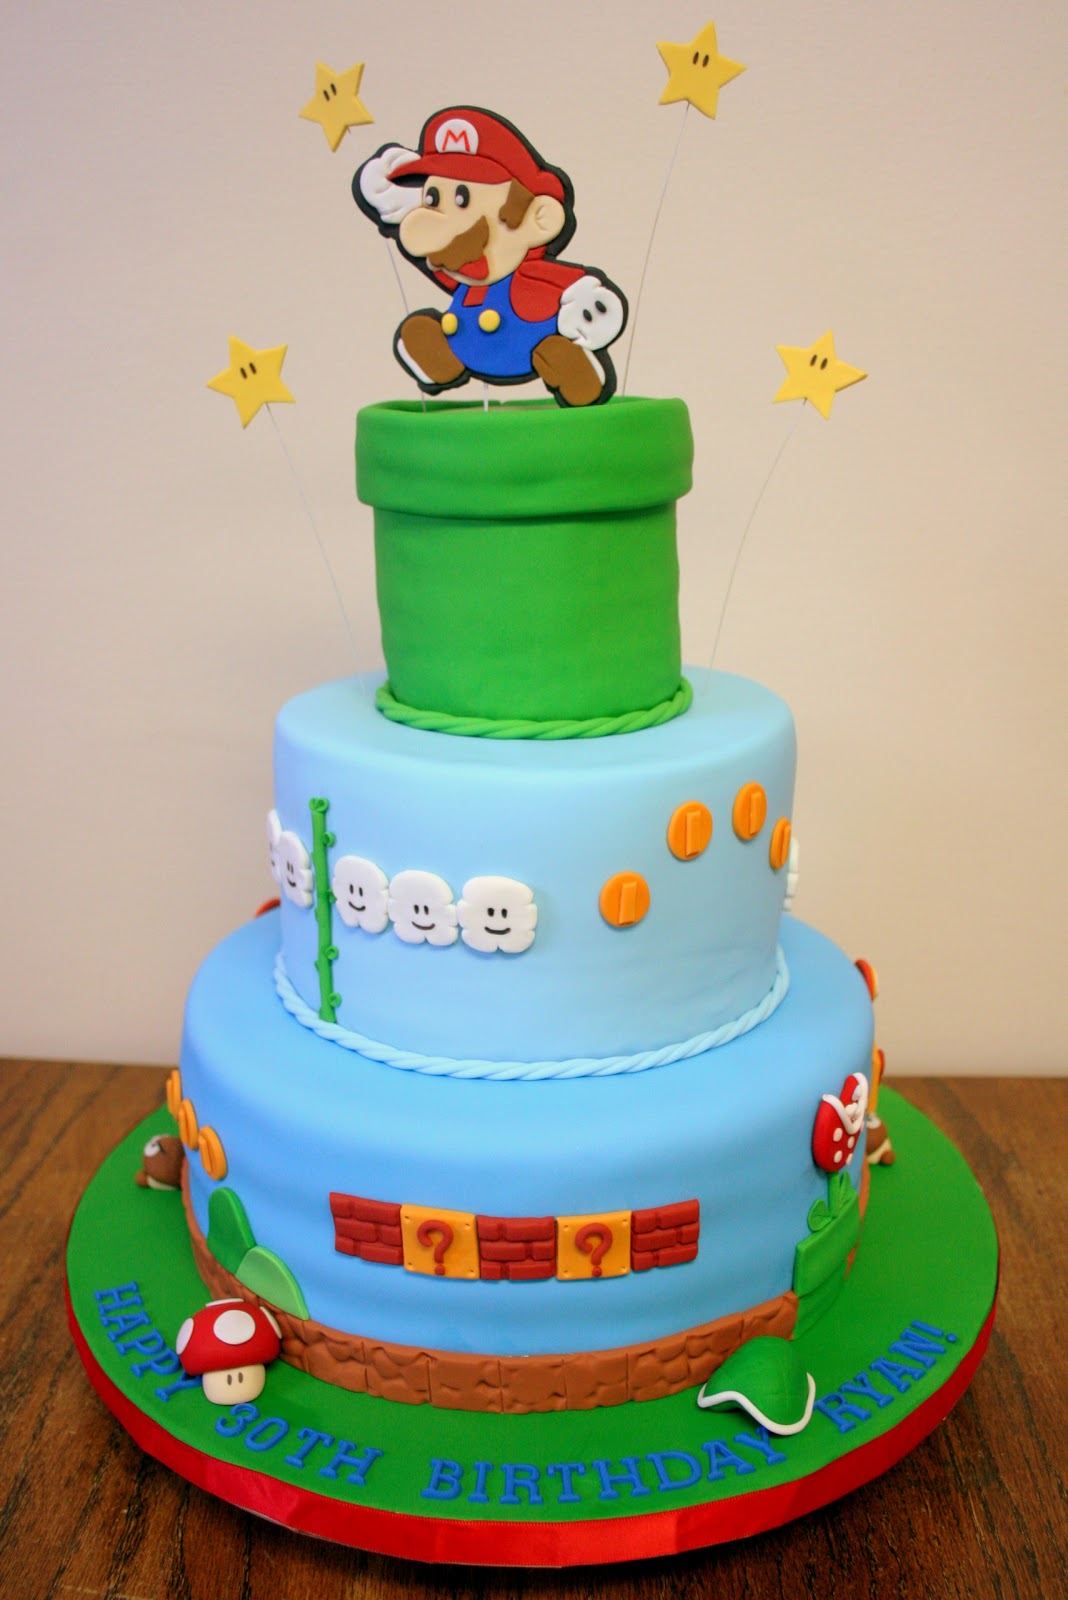 Stuff By Stace: Super Mario Brothers Cake